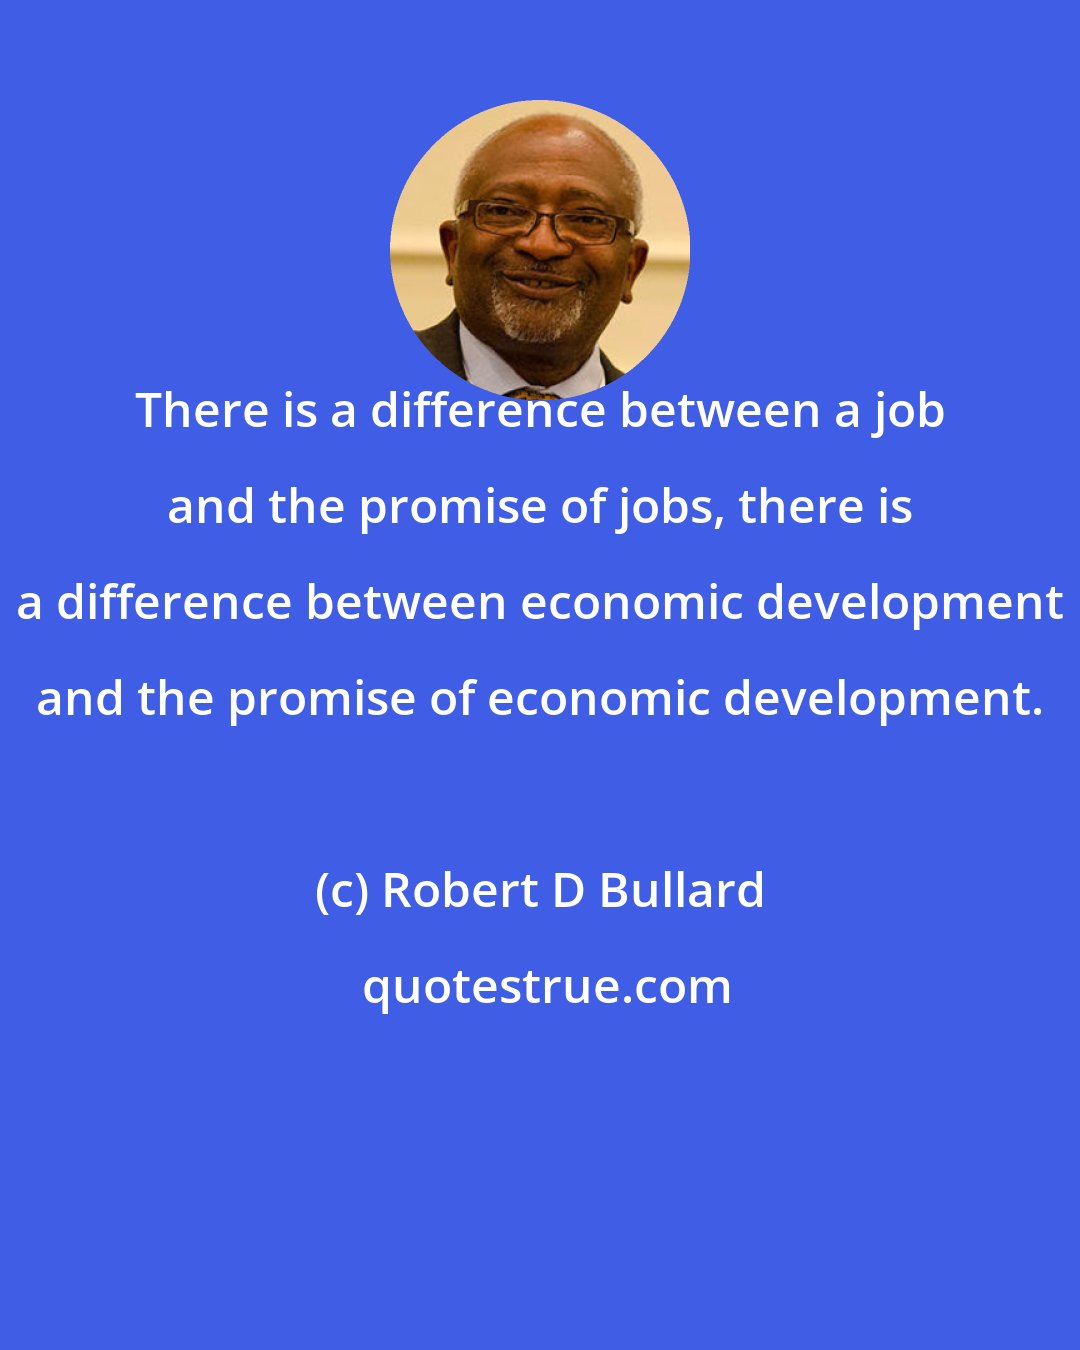 Robert D Bullard: There is a difference between a job and the promise of jobs, there is a difference between economic development and the promise of economic development.